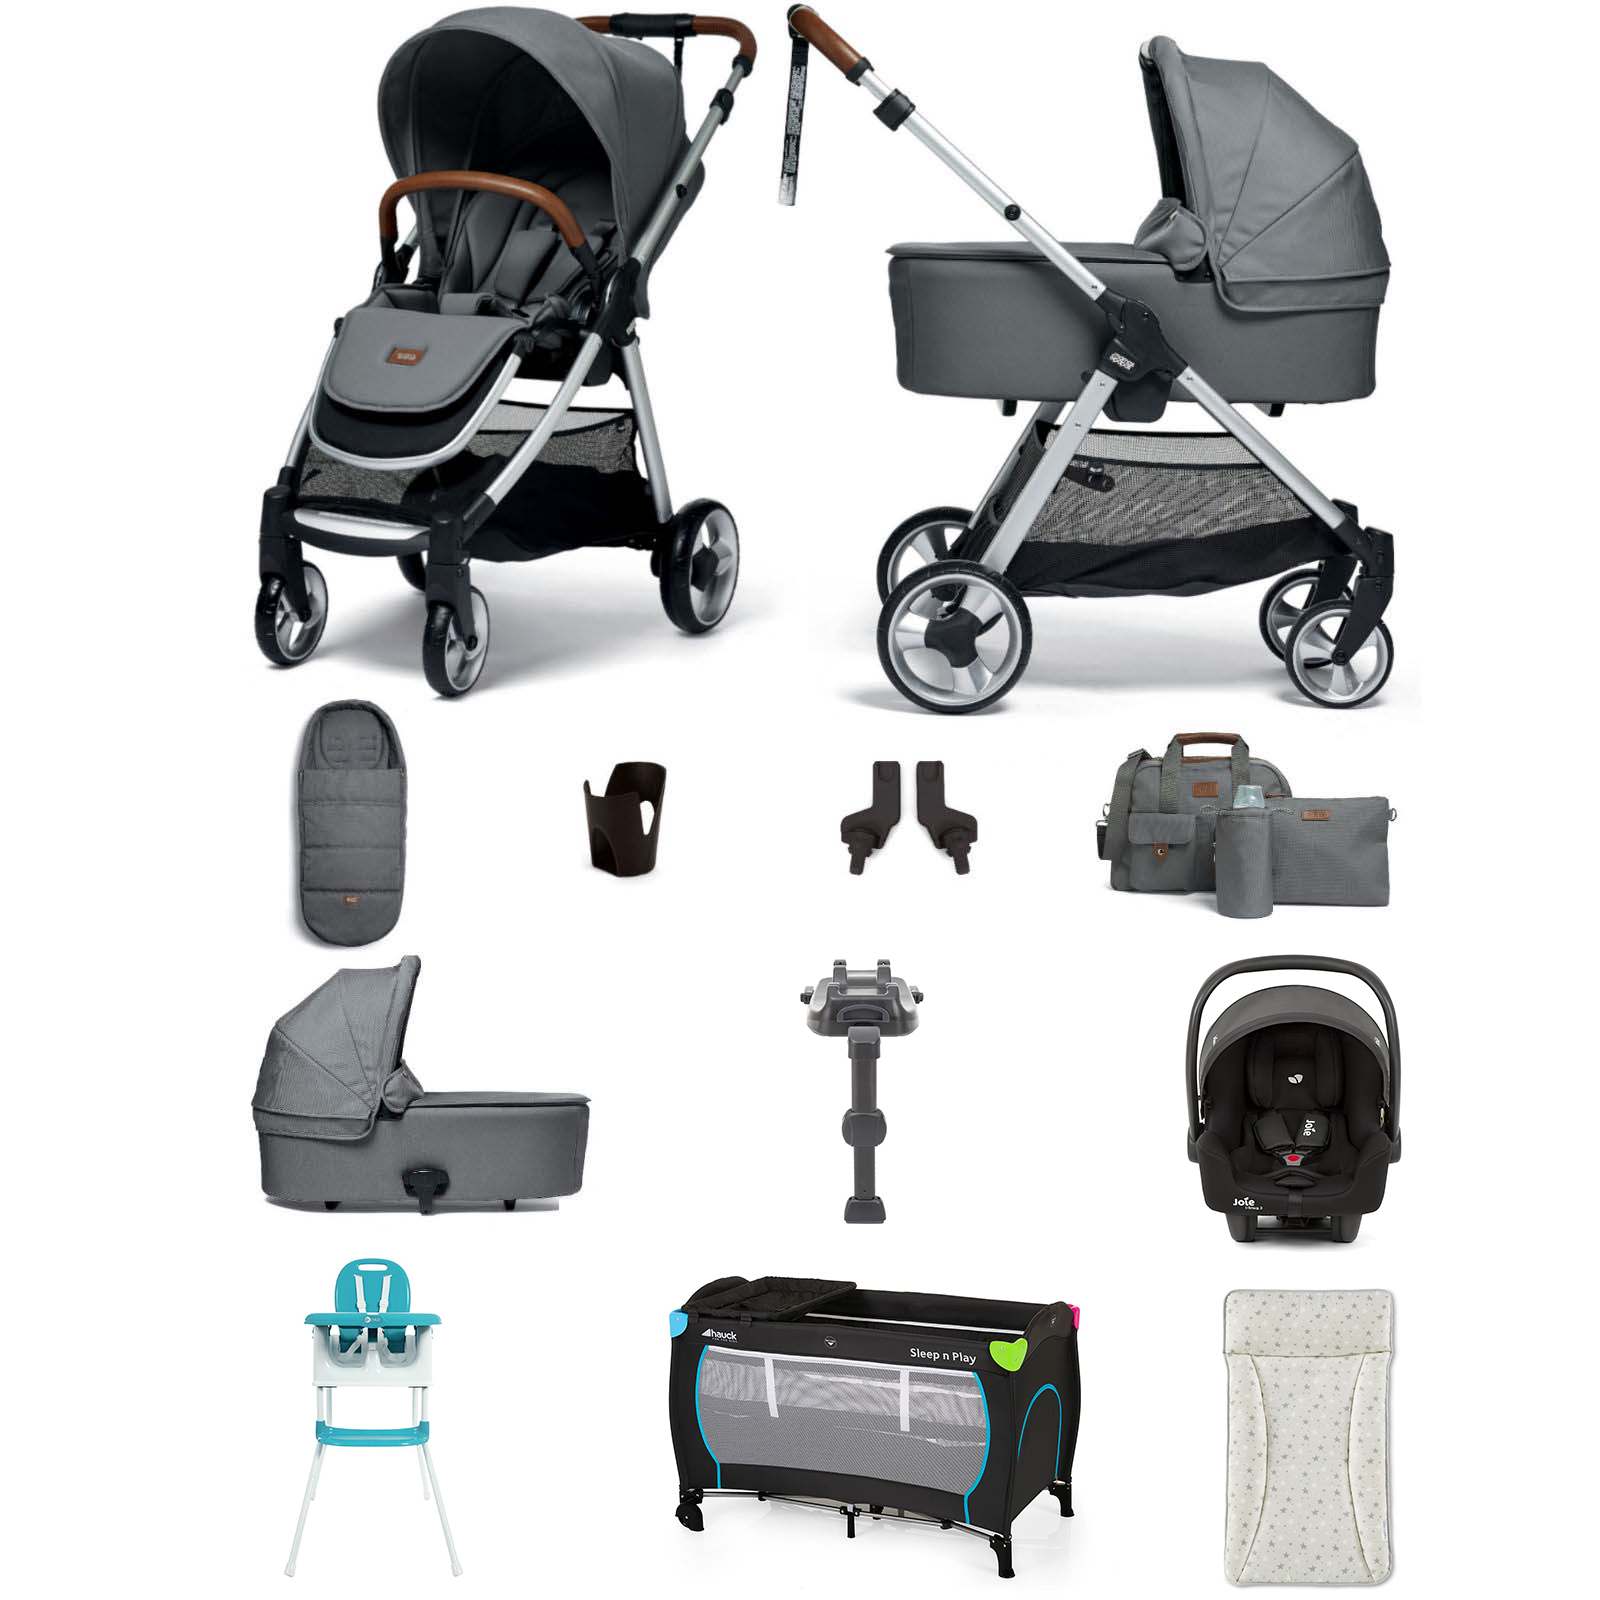 Mamas & Papas Flip XT2 12pc Essentials (i-Snug 2 Car Seat) Everything You Need Travel System Bundle with Carrycot & ISOFIX Base - Fossil Grey